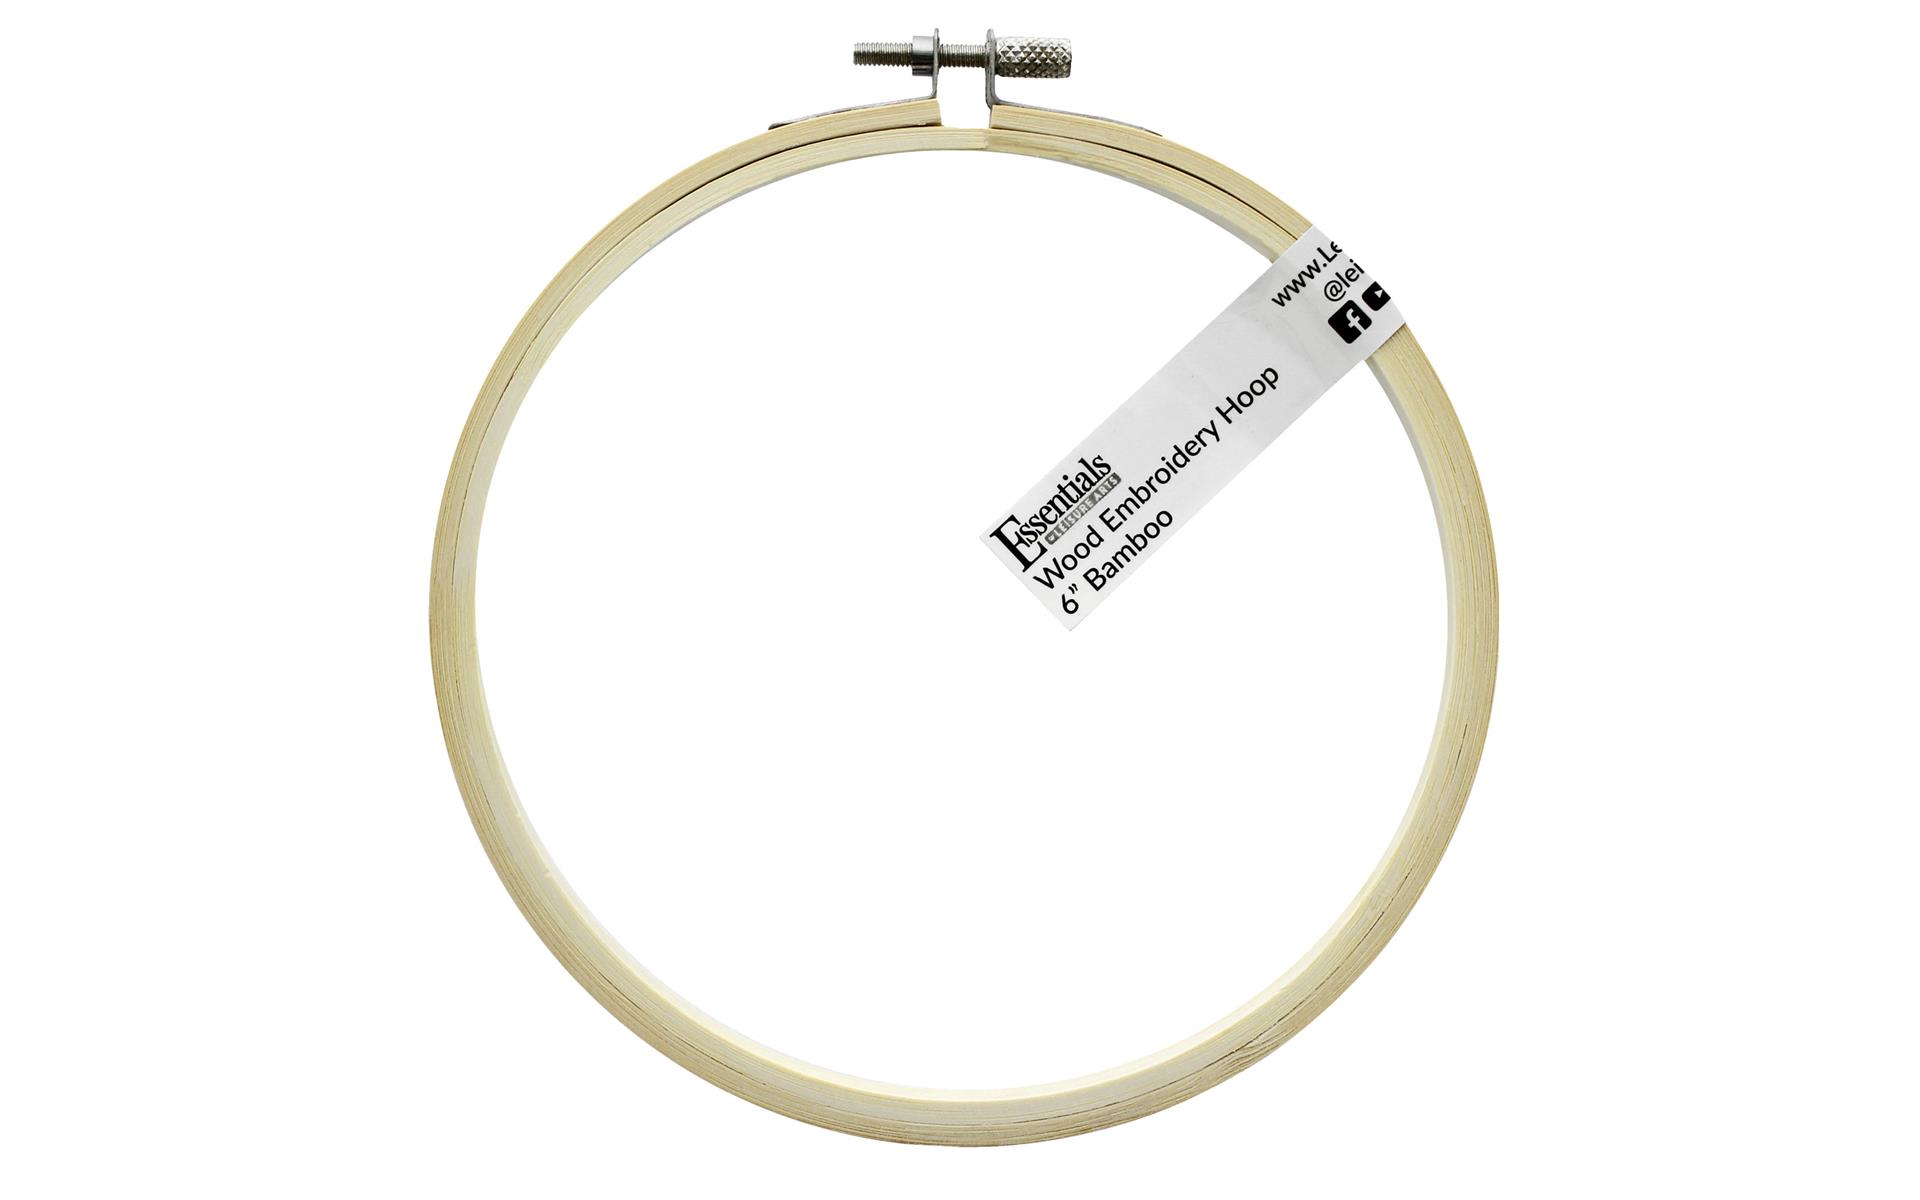 Essentials by Leisure Arts Wood Embroidery Hoop 6 Bamboo - wooden hoops  for crafts - embroidery hoop holder - cross stitch hoop - cross stitch  hoops